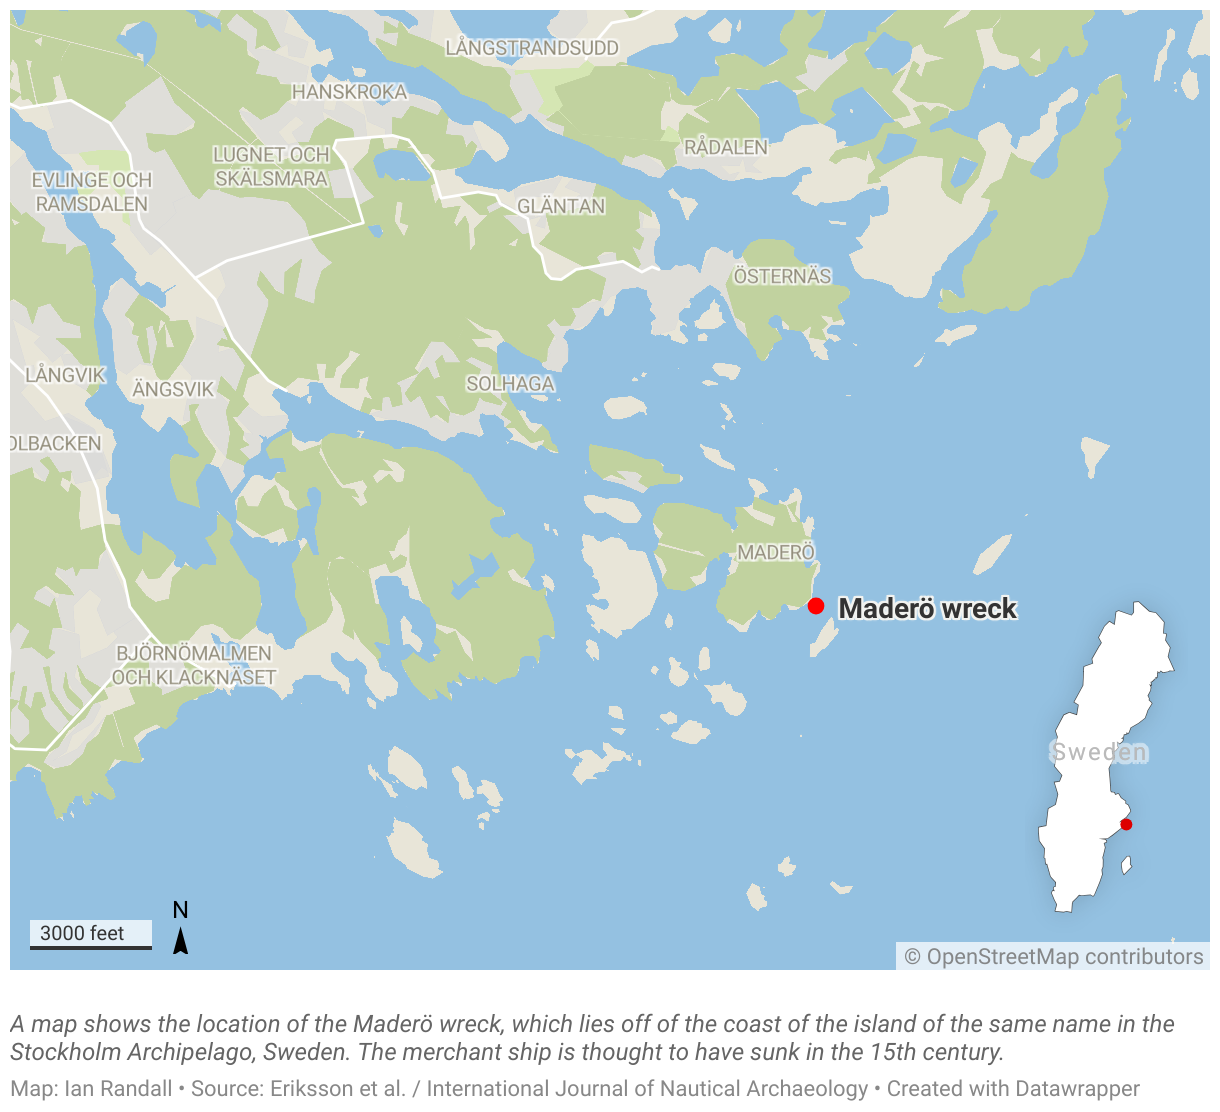 A map shows the location of the Maderö wreck, which lies off of the coast of the island of the same name in the Stockholm Archipelago, Sweden.